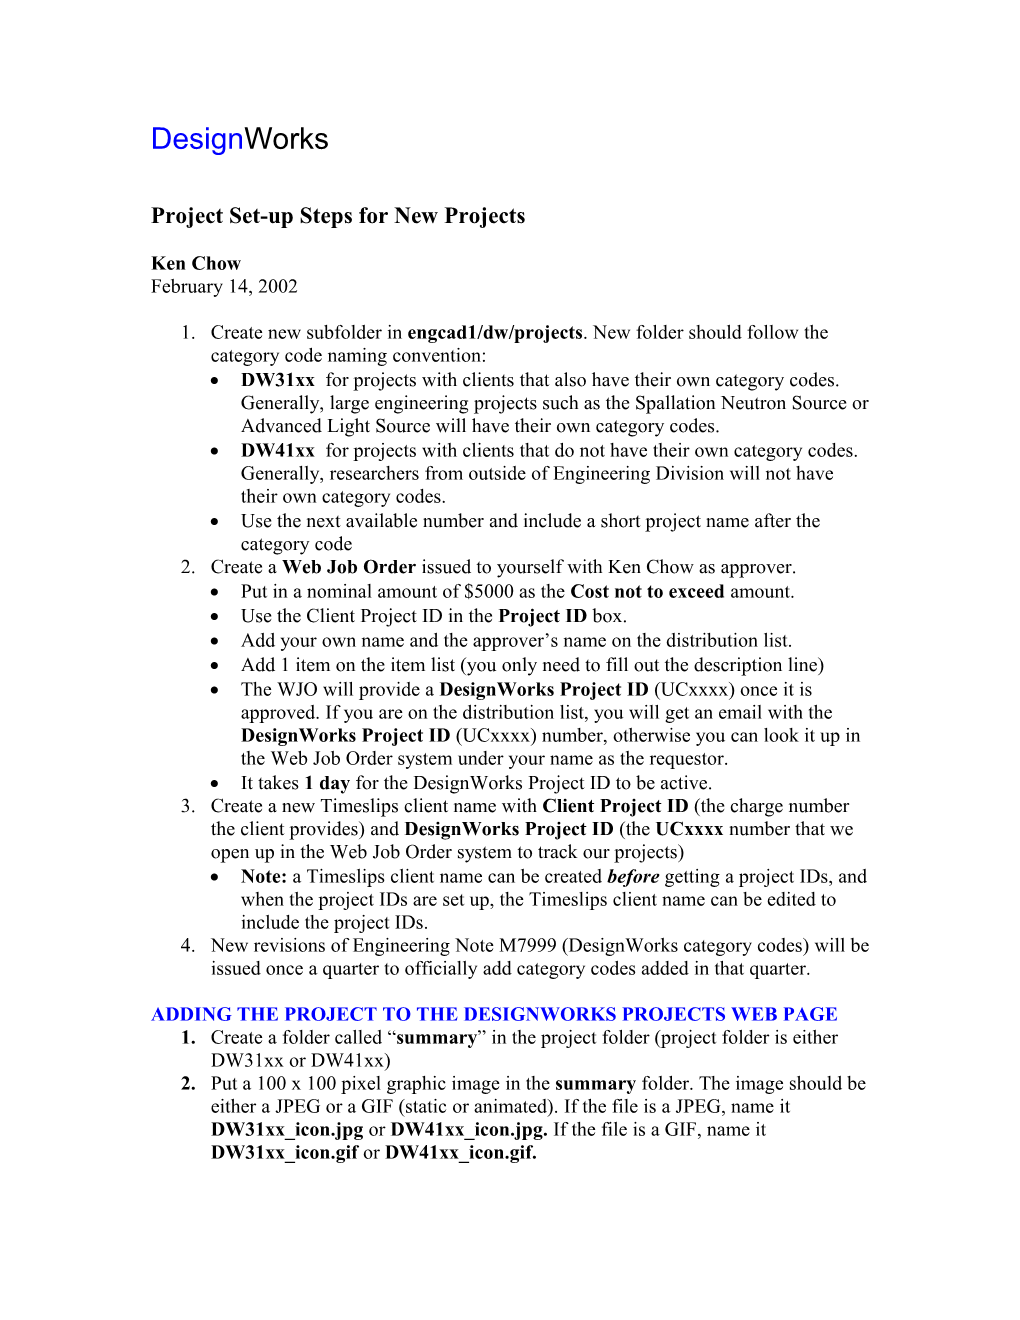 Project Set-Up Steps for New Projects